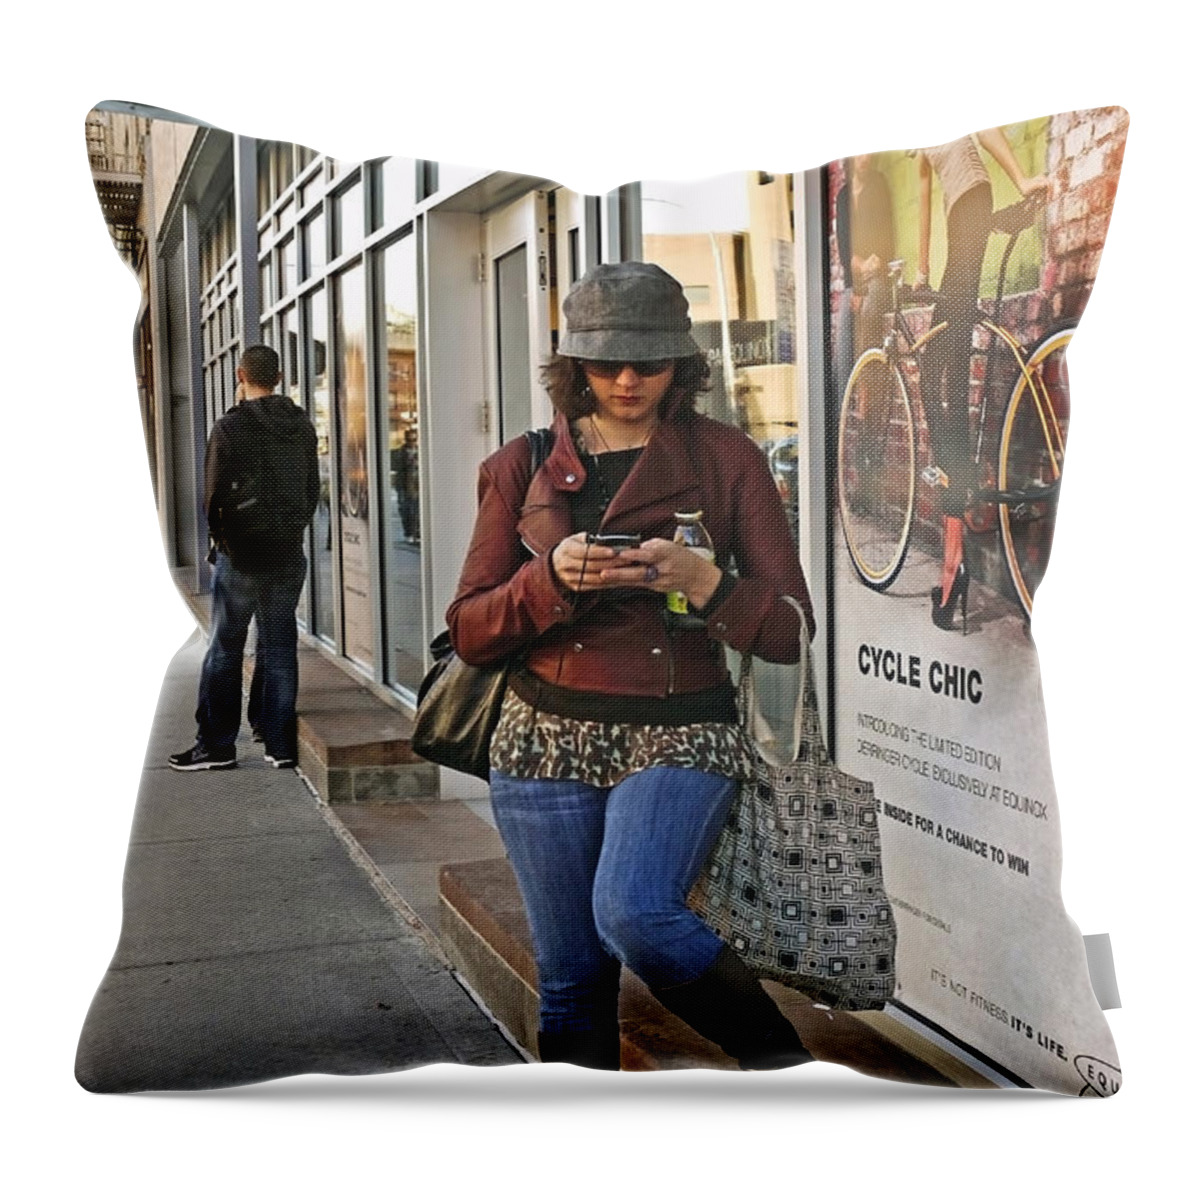 Woman Throw Pillow featuring the photograph Cycle Chic by Frank Winters